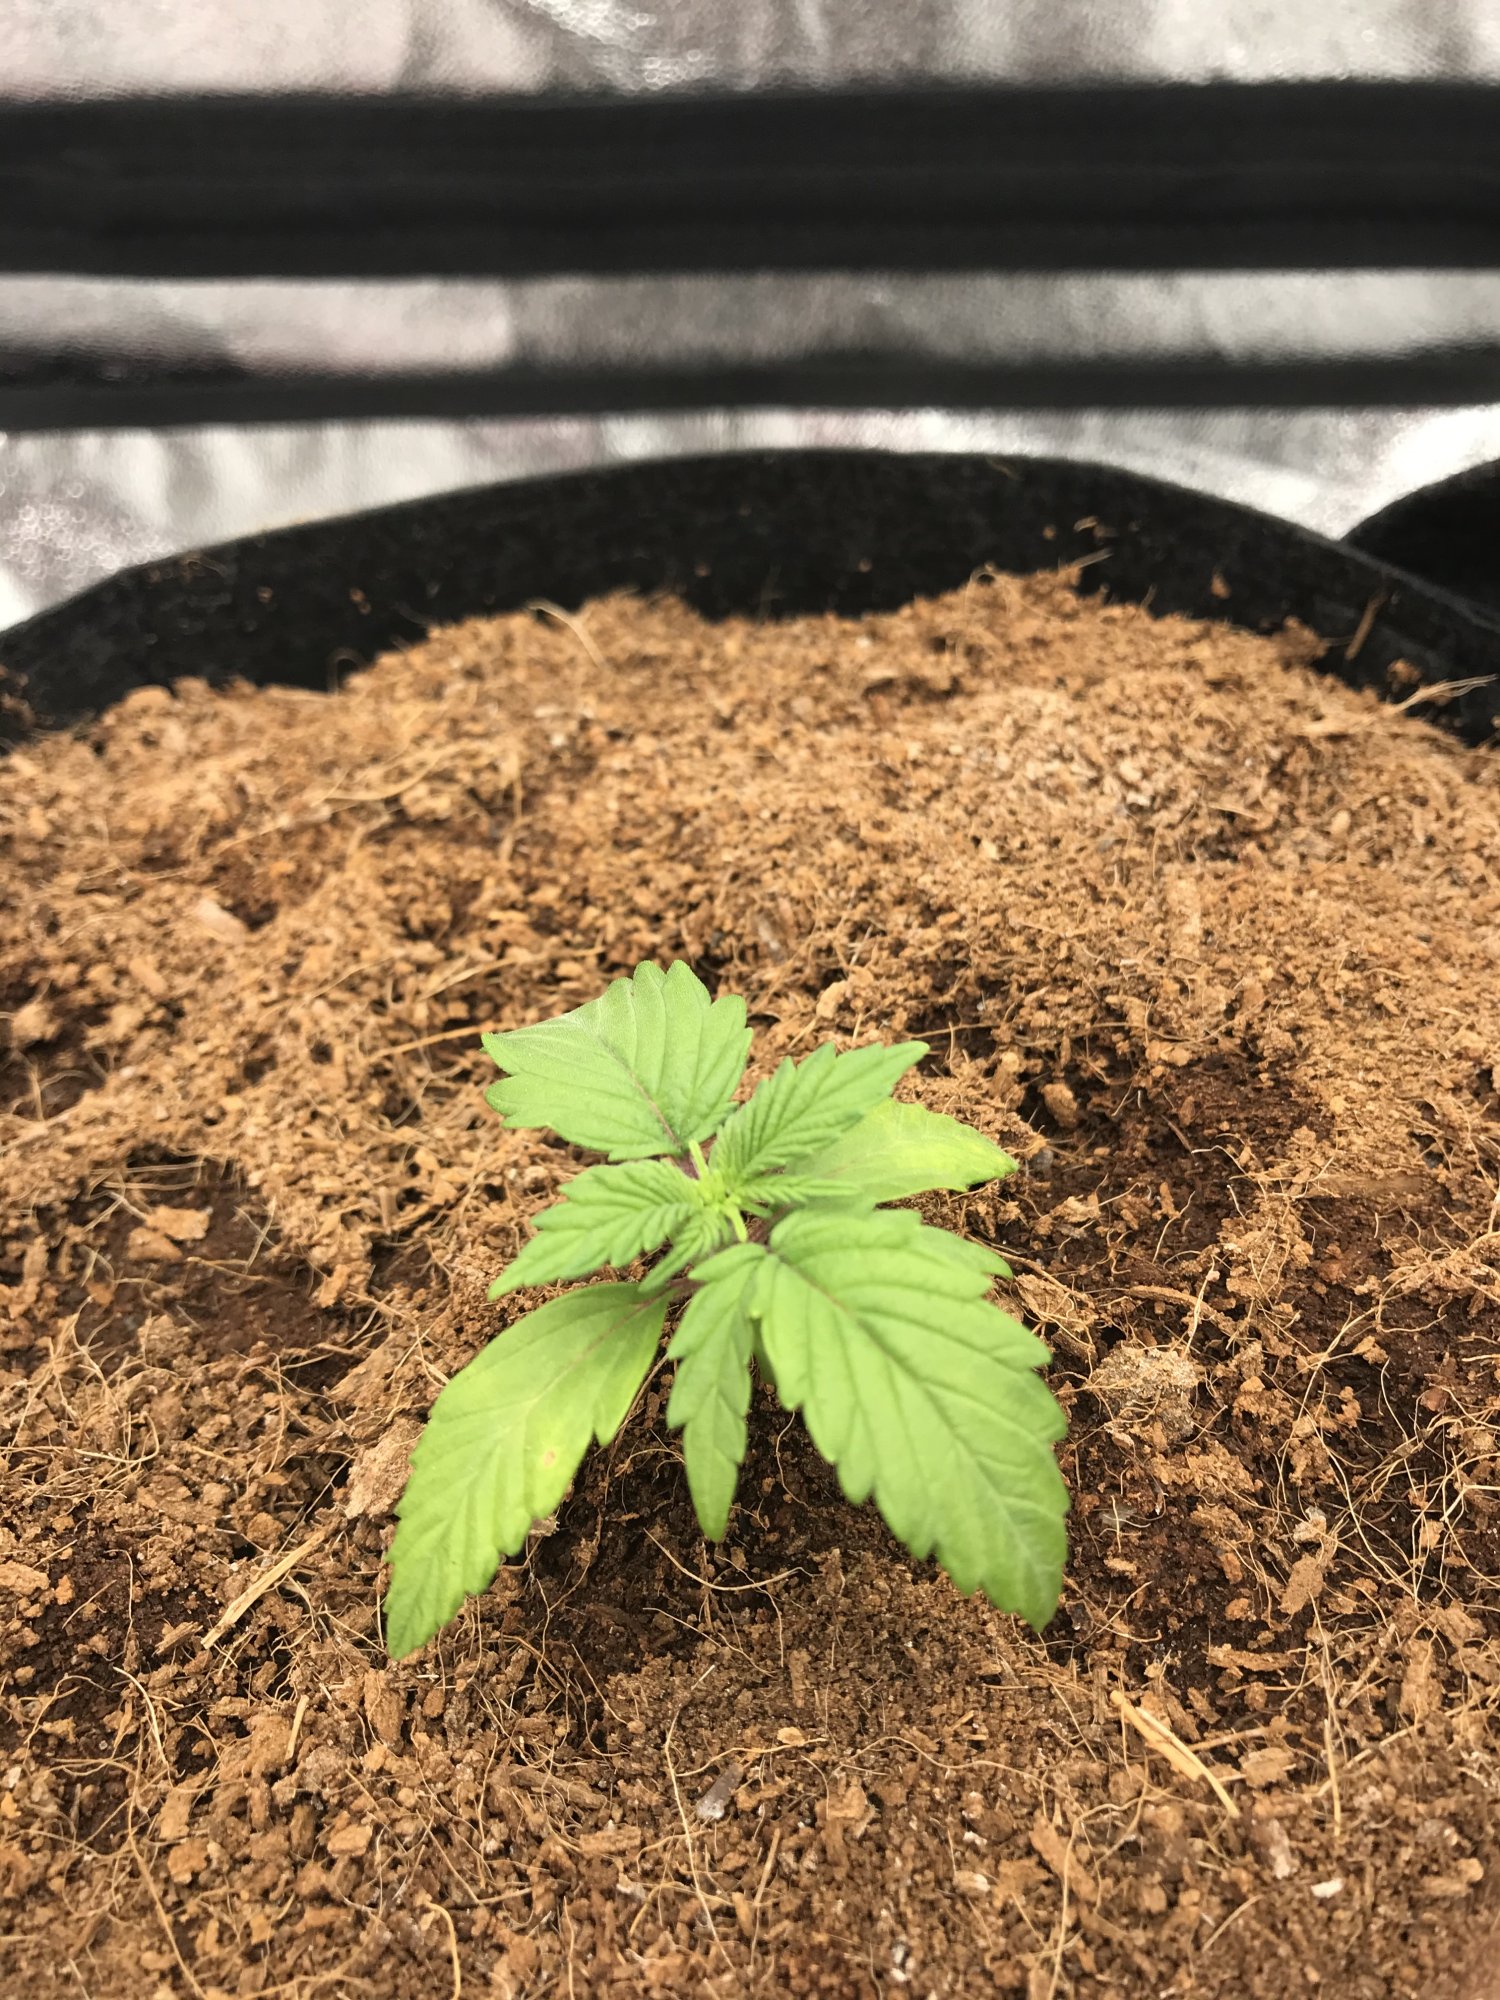 Having problems with my first grow